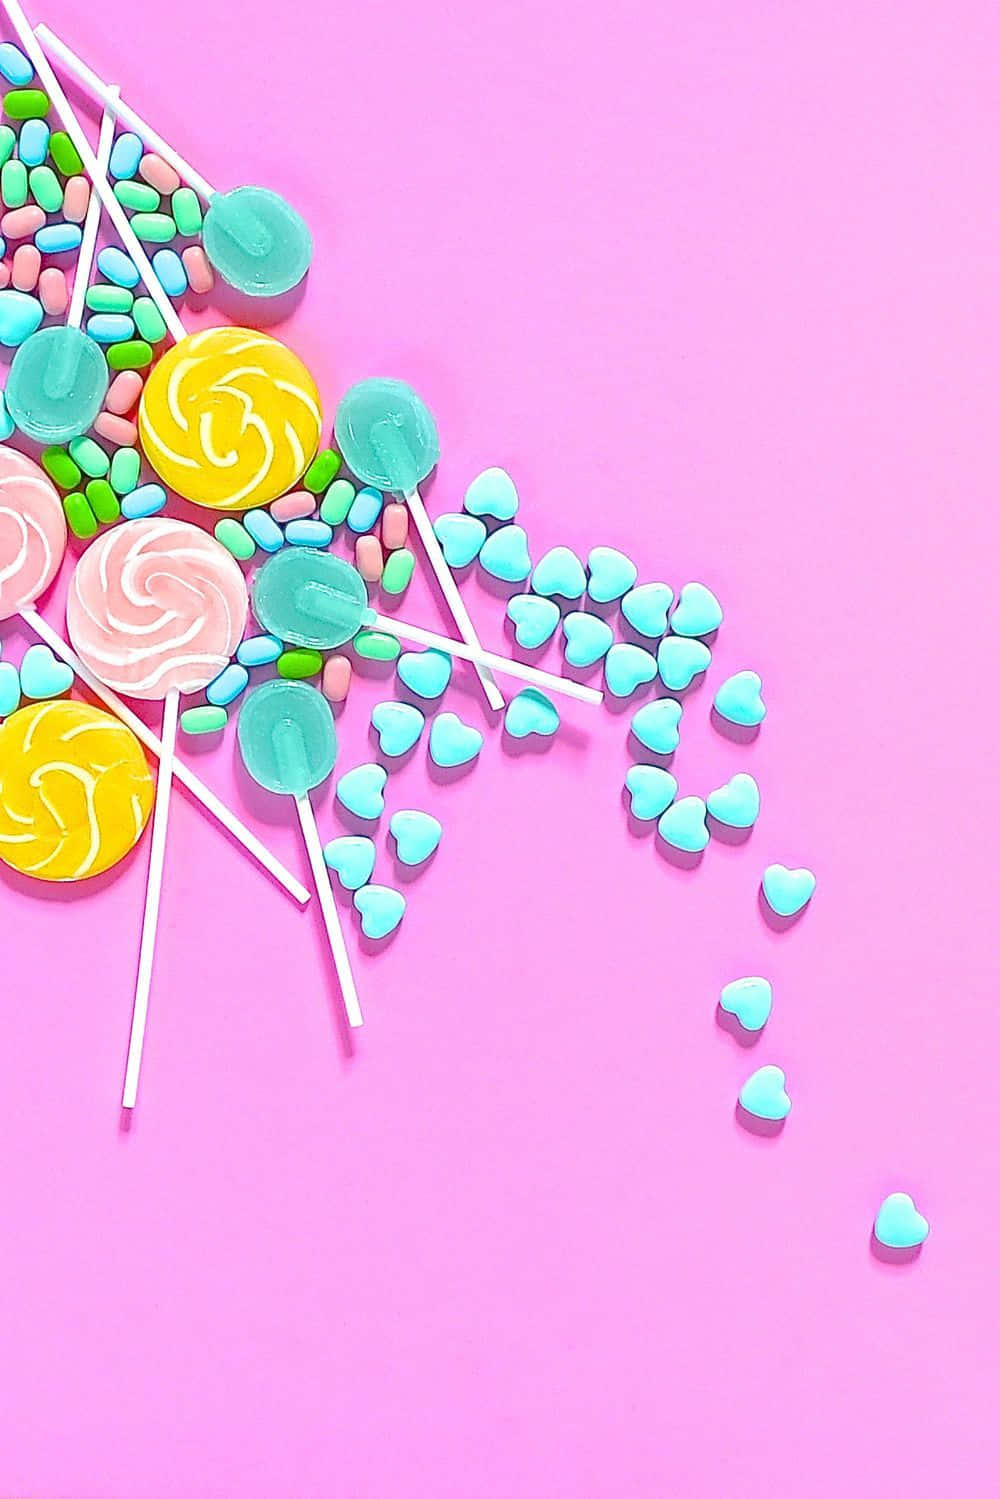 Scattered Candy Aesthetic Wallpaper